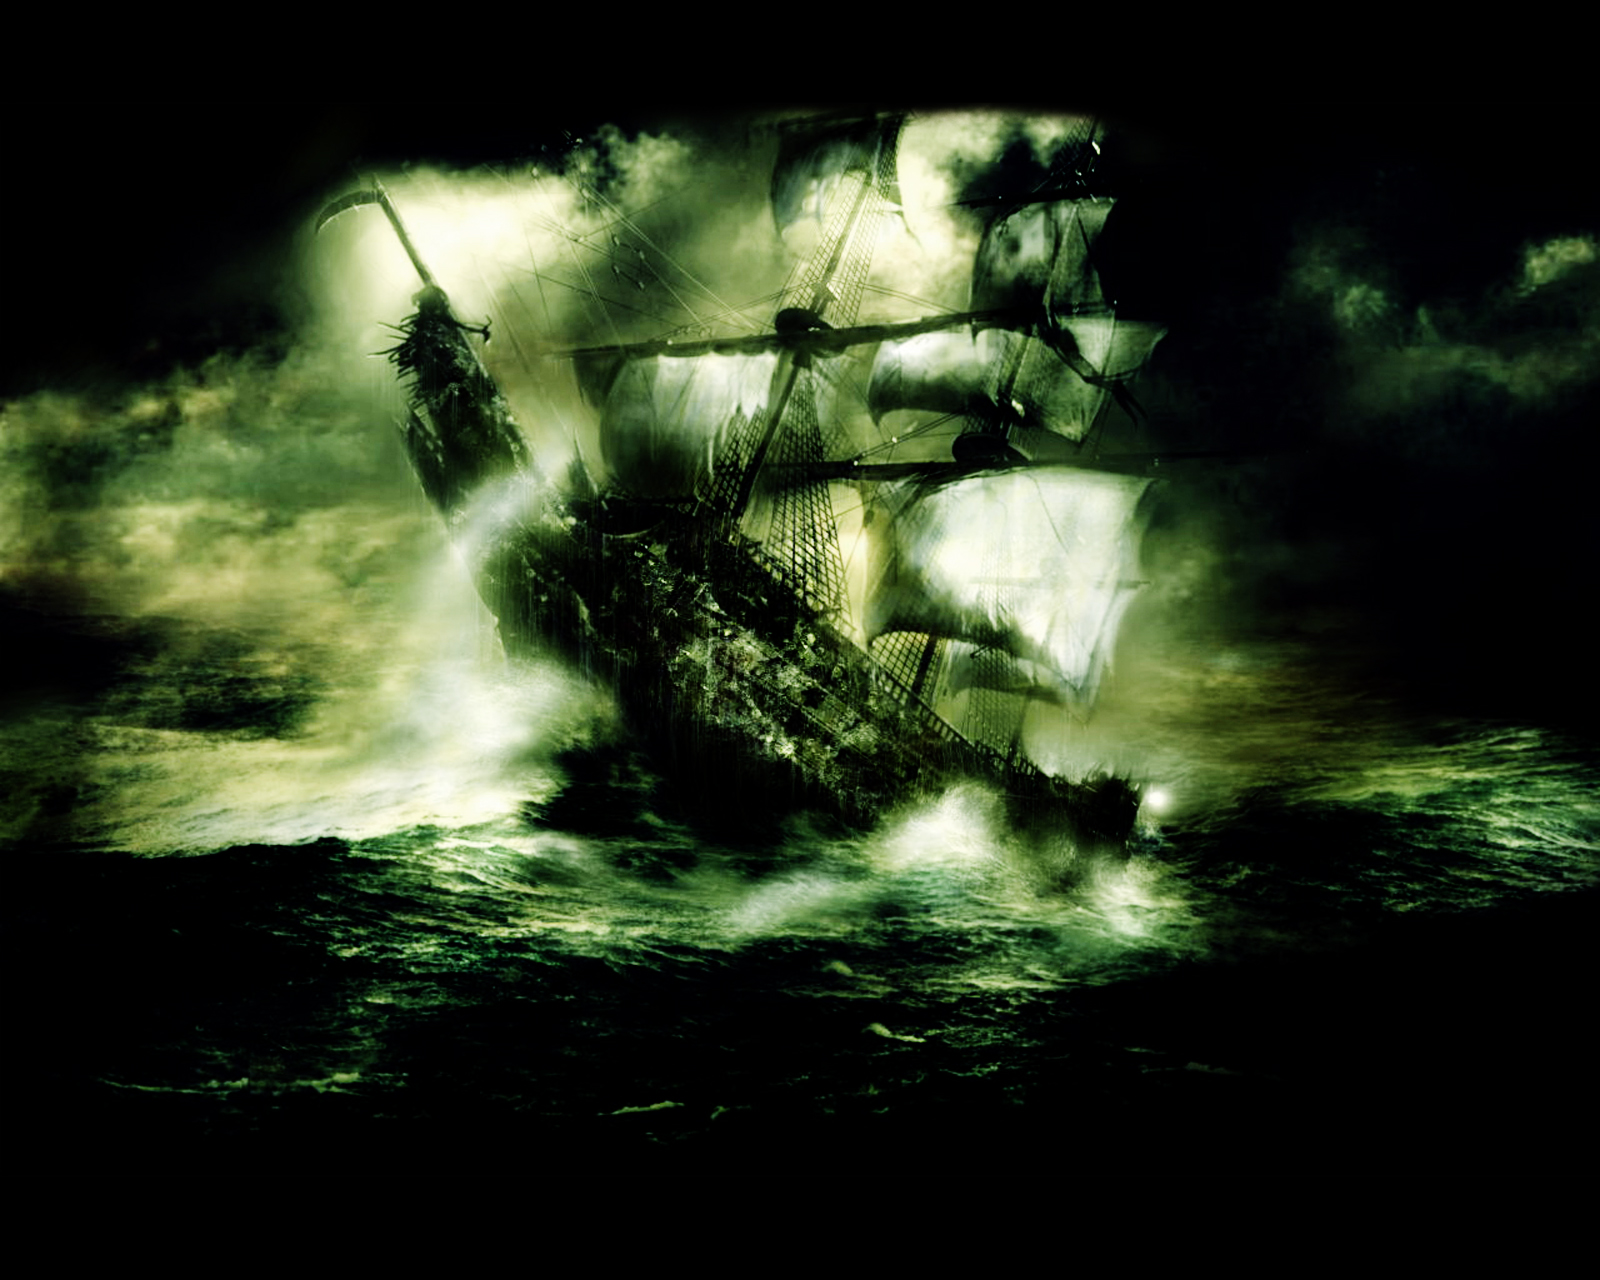 Pirate Ships Awesome HD Wallpapers Download Free Wallpapers in HD for